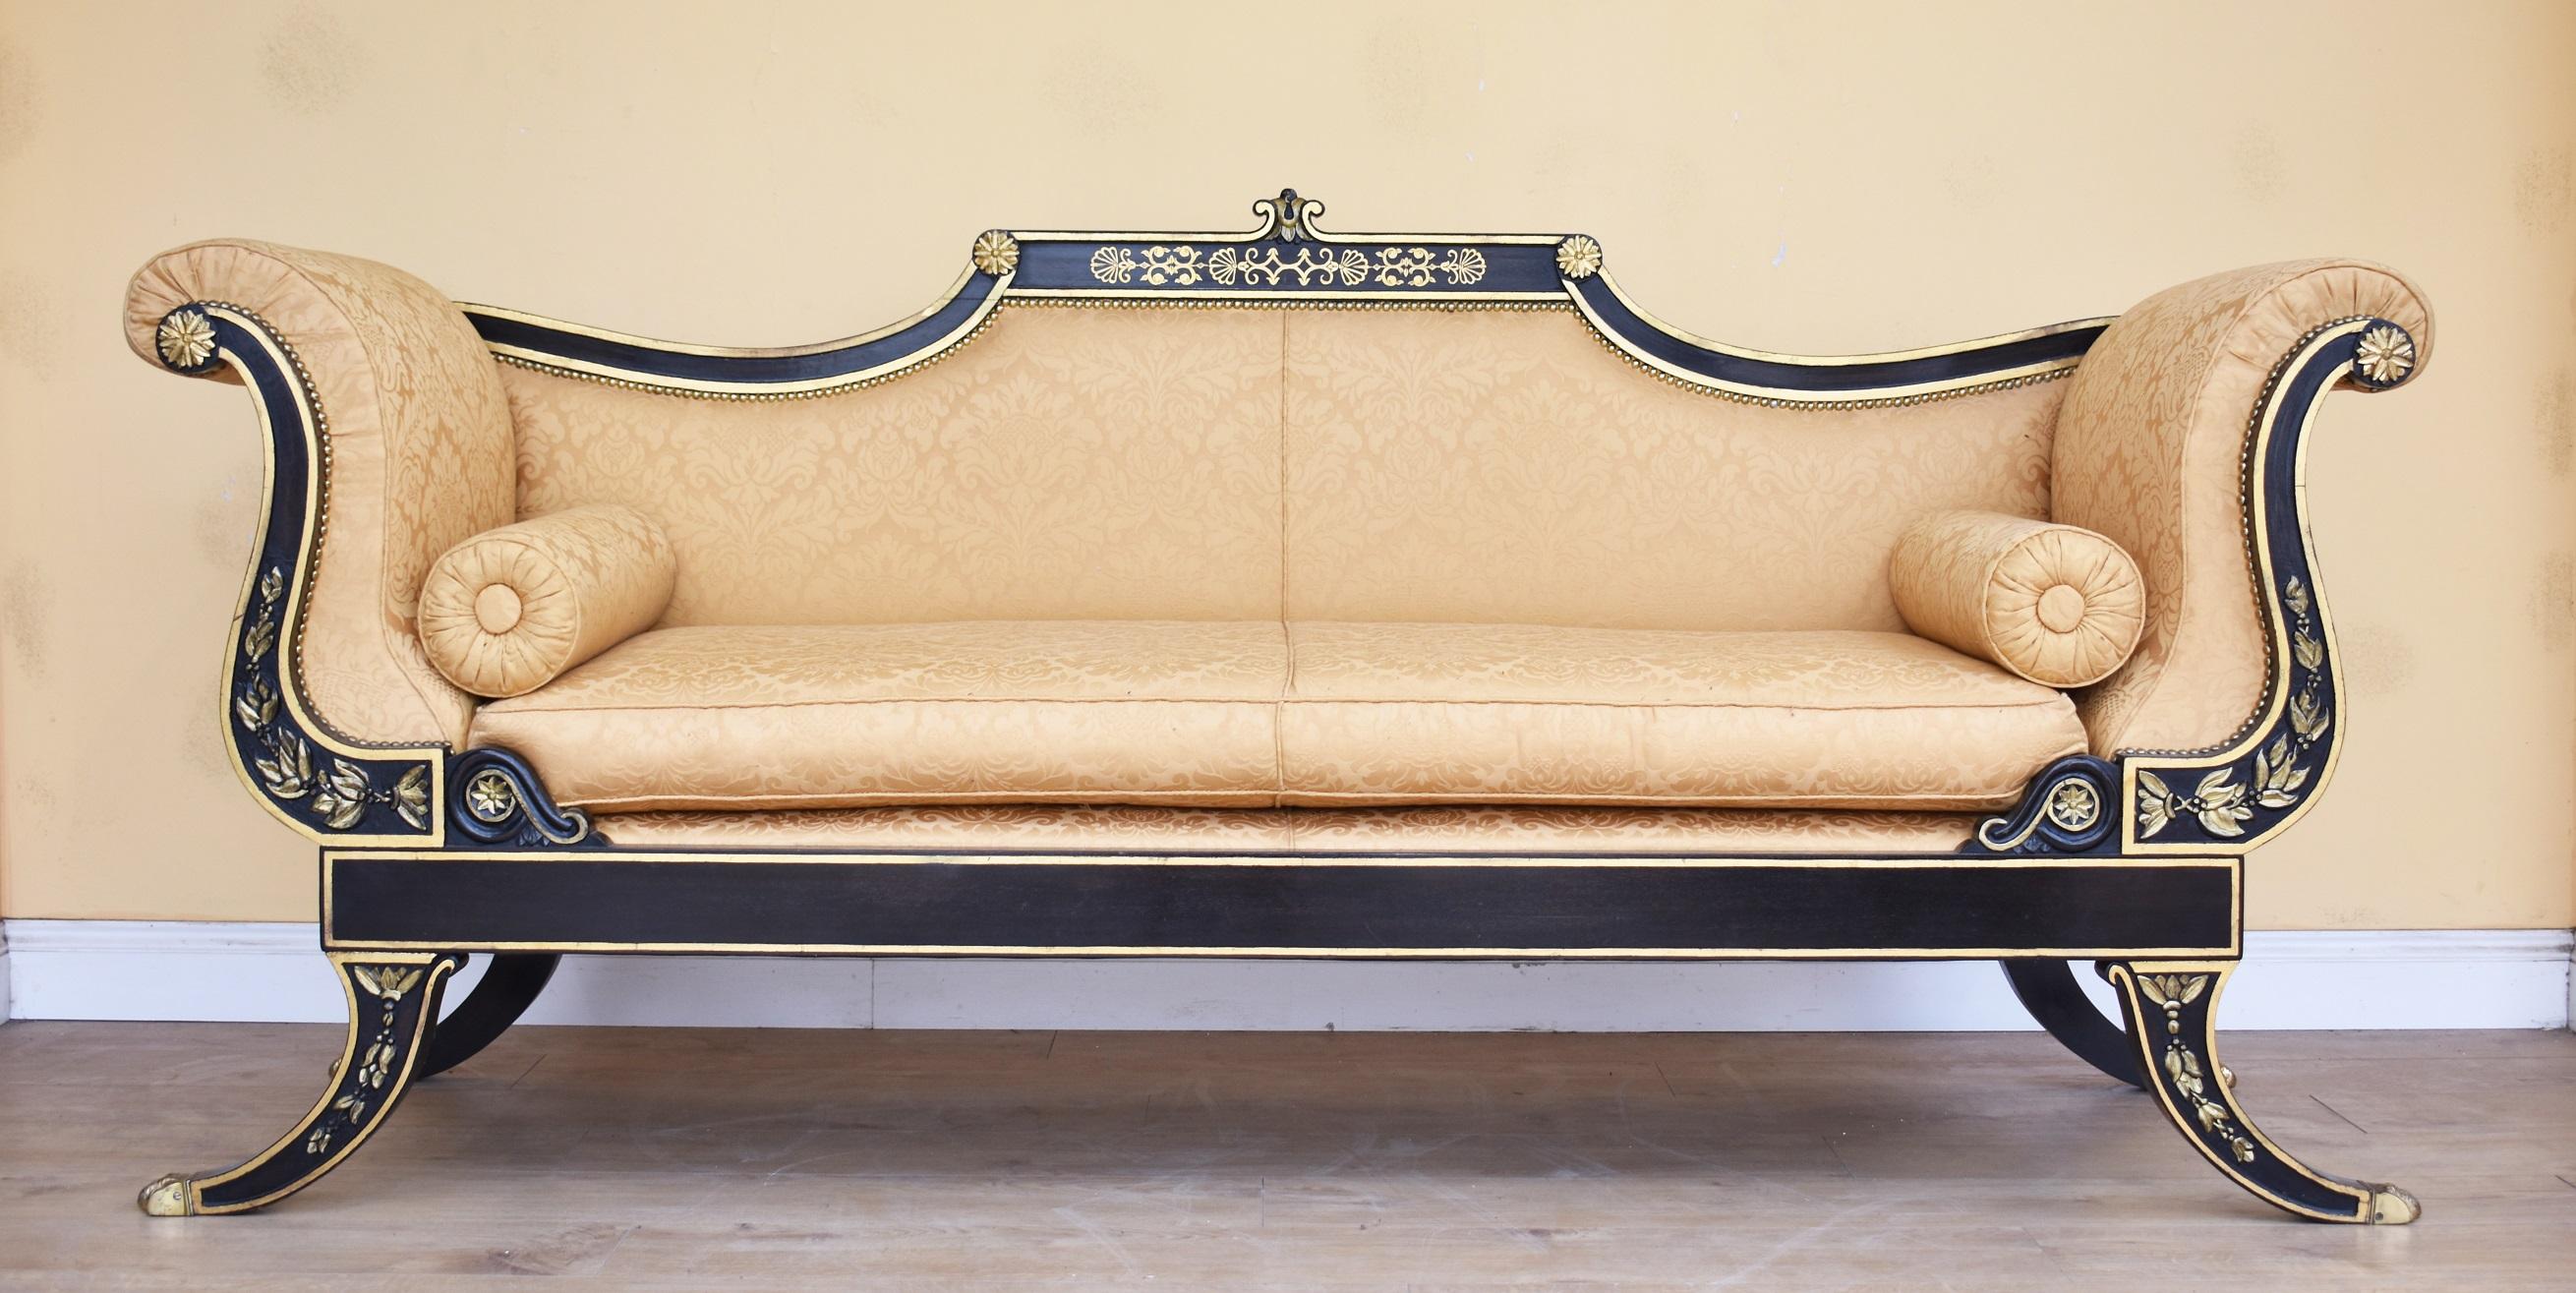 For sale is a very good quality 20th century English Regency style ebonised parcel-gilt three-piece suite, with pad backs having scroll arms and cushion seats, upholstered in lemon damask, raised on sabre legs. The whole suite is in very good